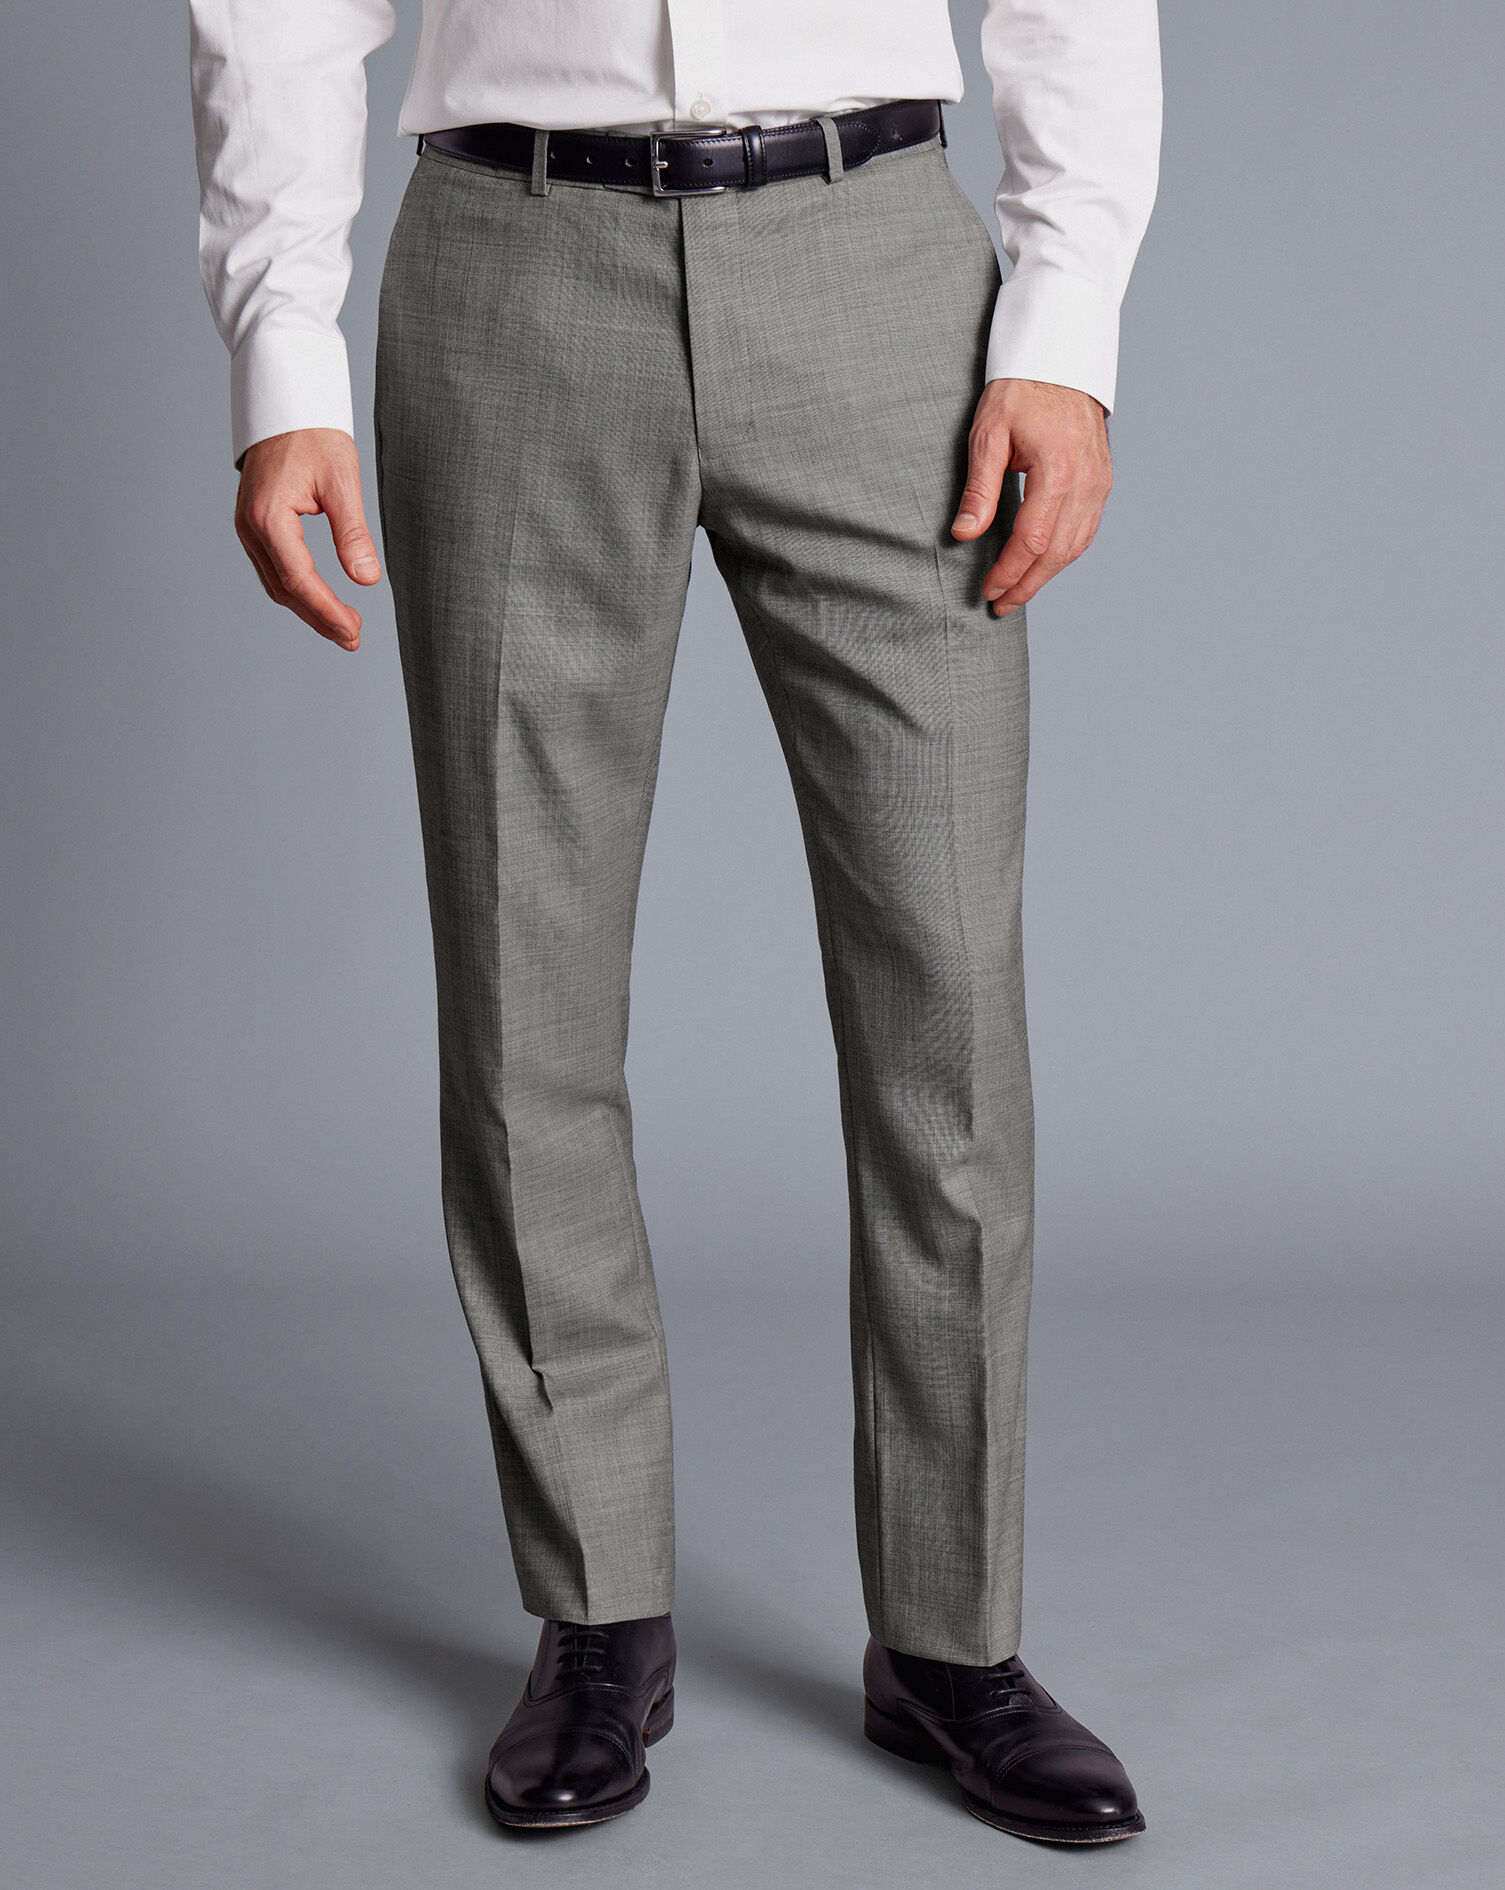 Buy Charles Tyrwhitt Slim Fit Stripe Suit: Trousers from the Laura Ashley  online shop